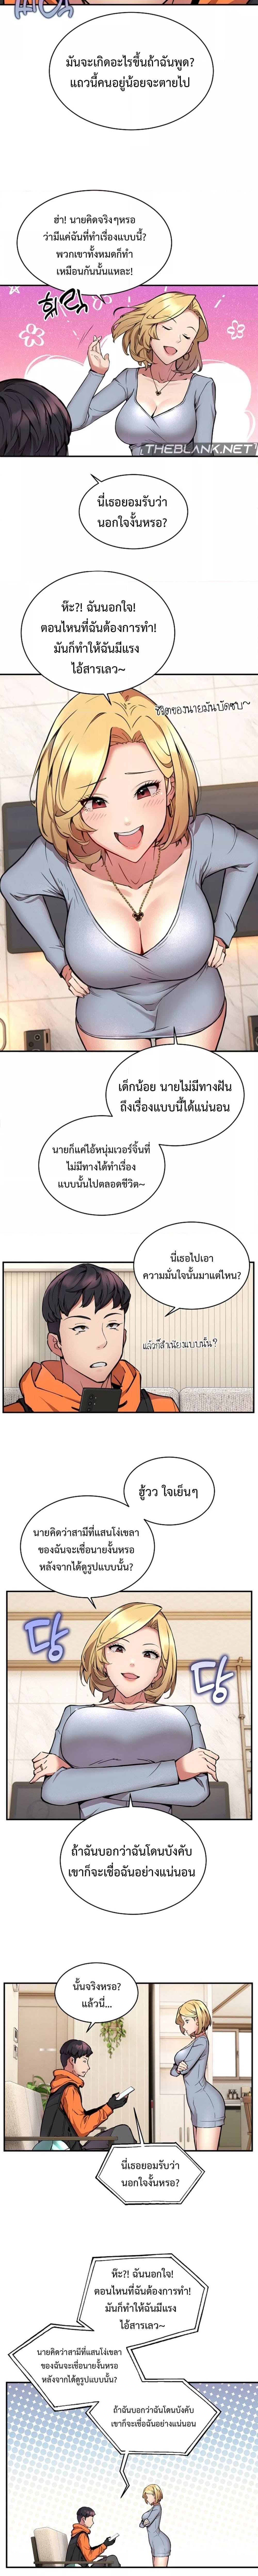 Driver in the New City ตอนที่ 2 ภาพ 8